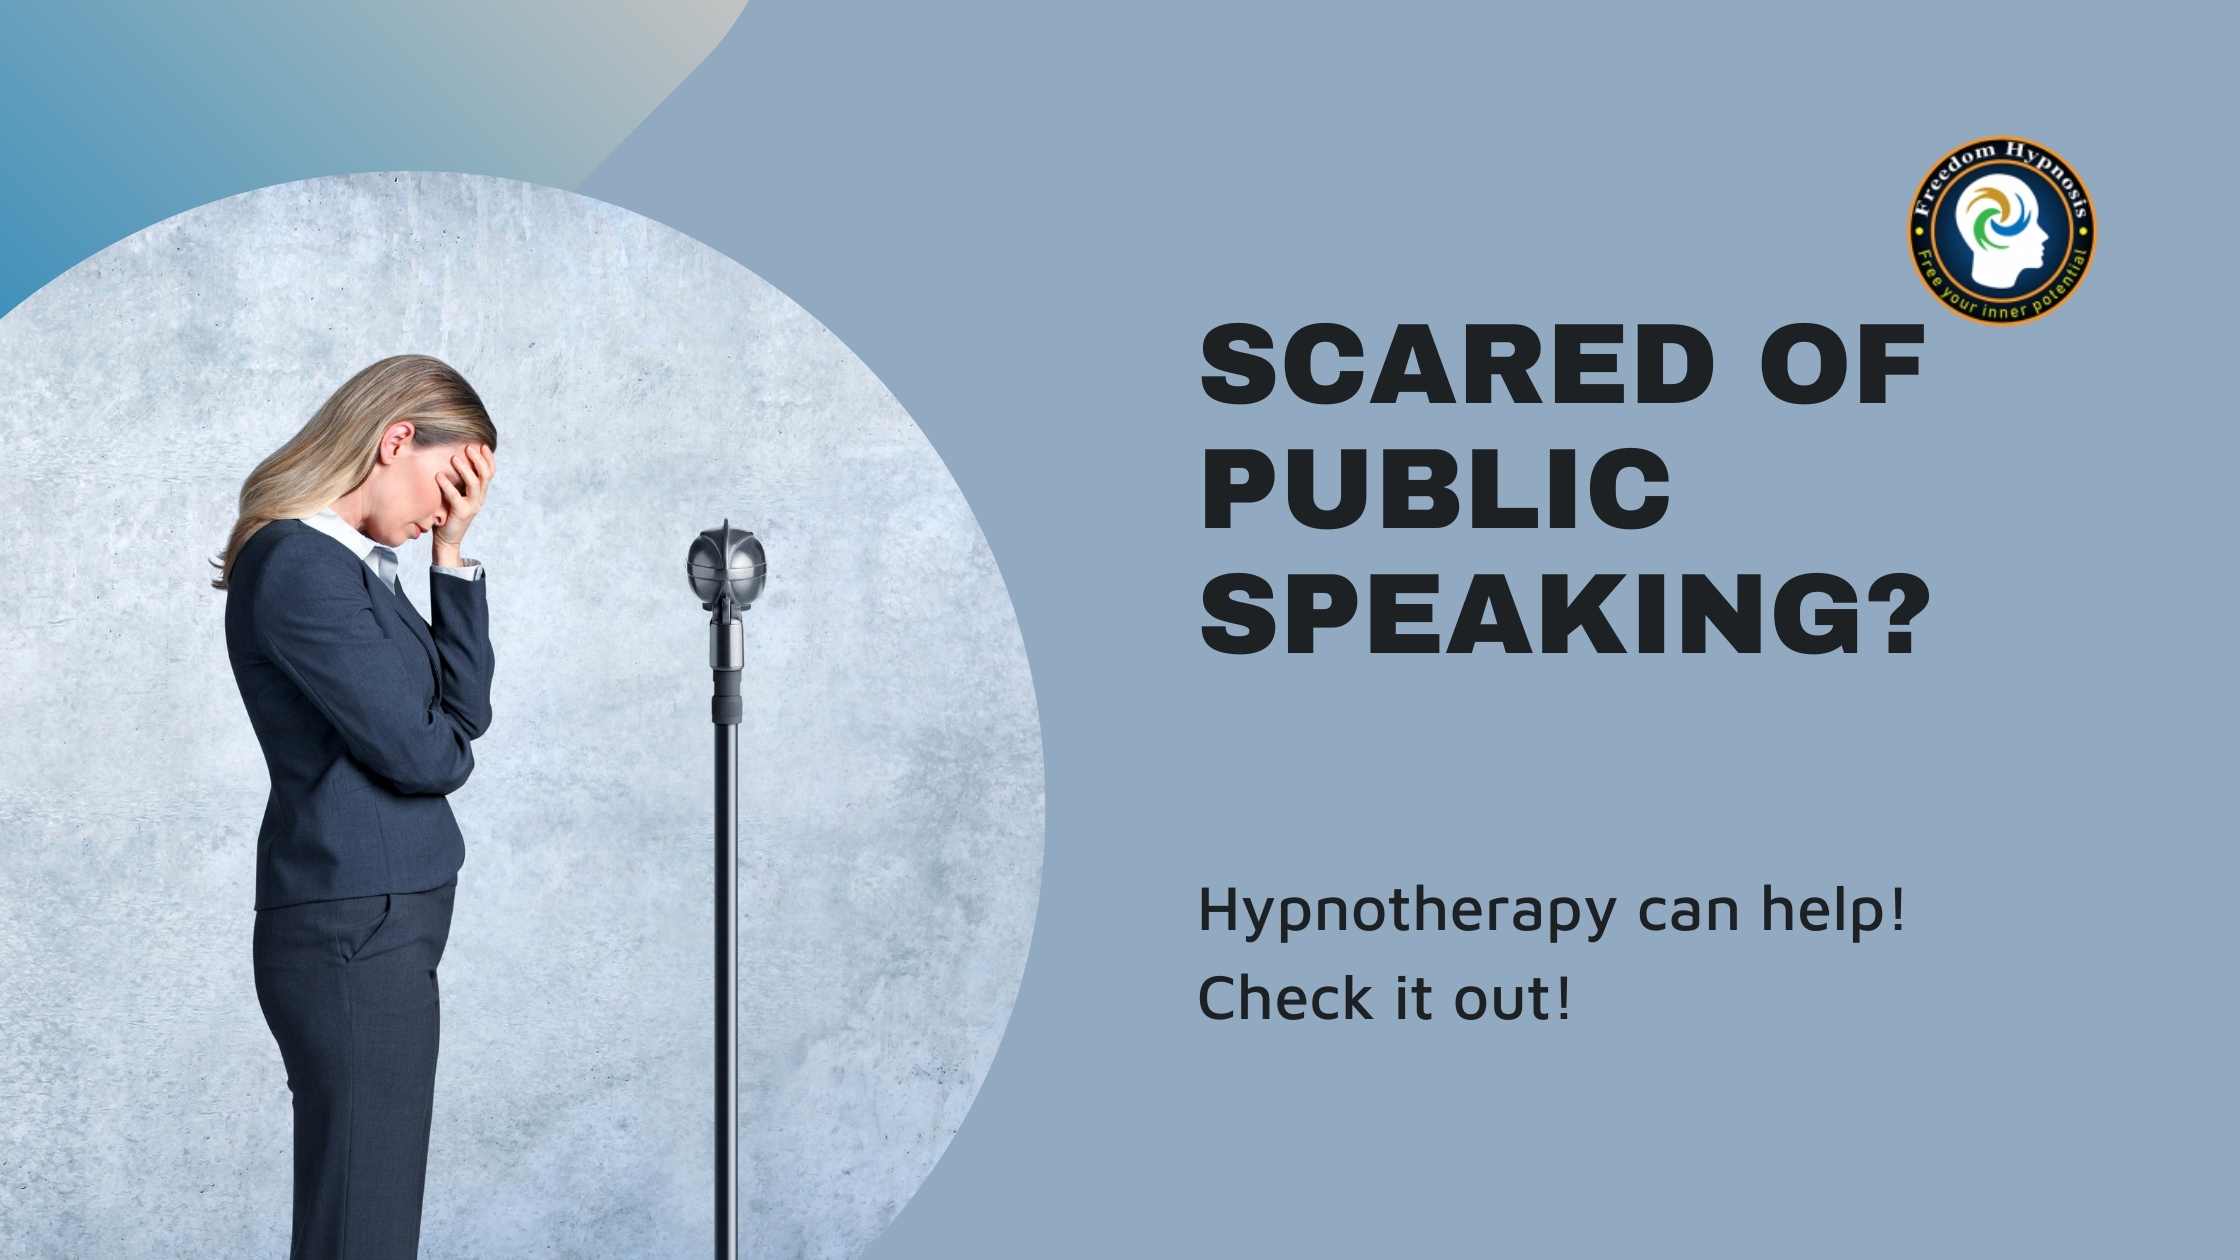 woman afraid of speaking in public uses hypnosis to gain confidence